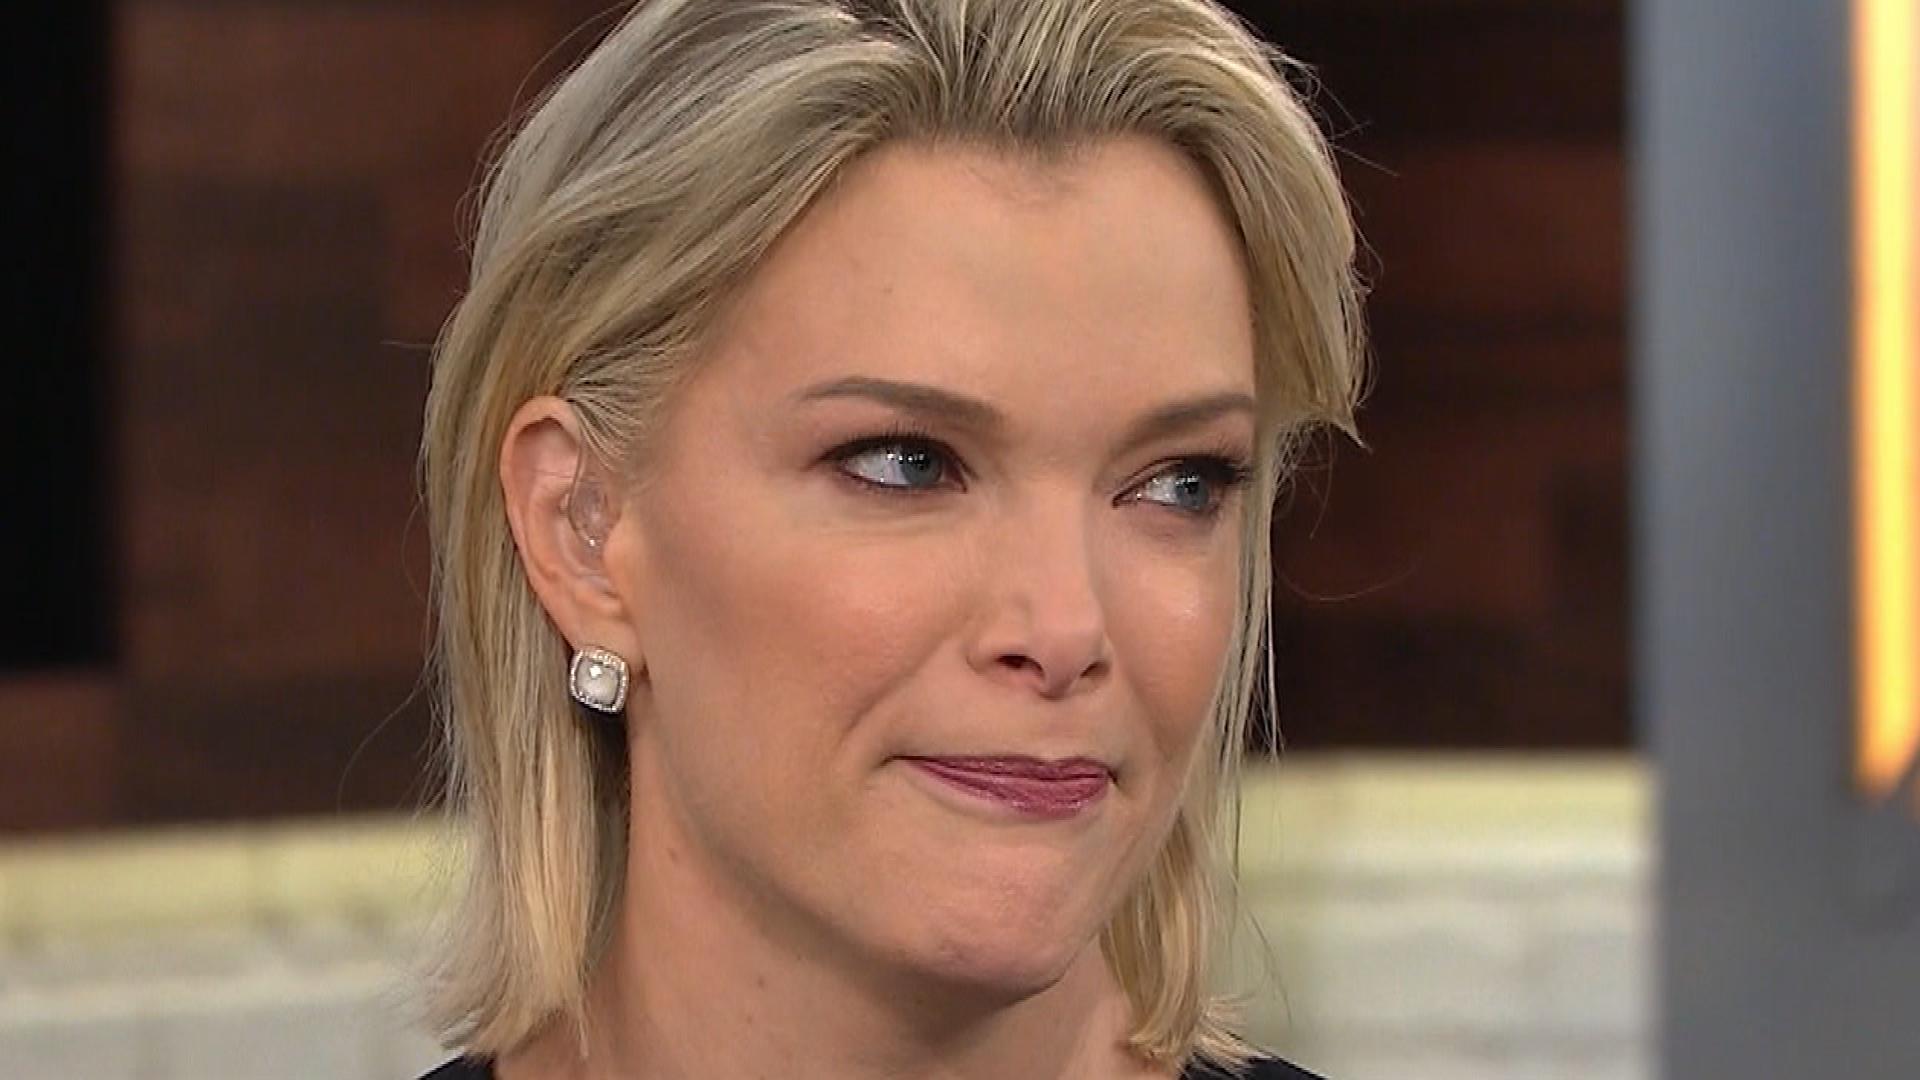 Megyn Kelly Will Not Appear On 'Today' For the Rest of the Week Amid